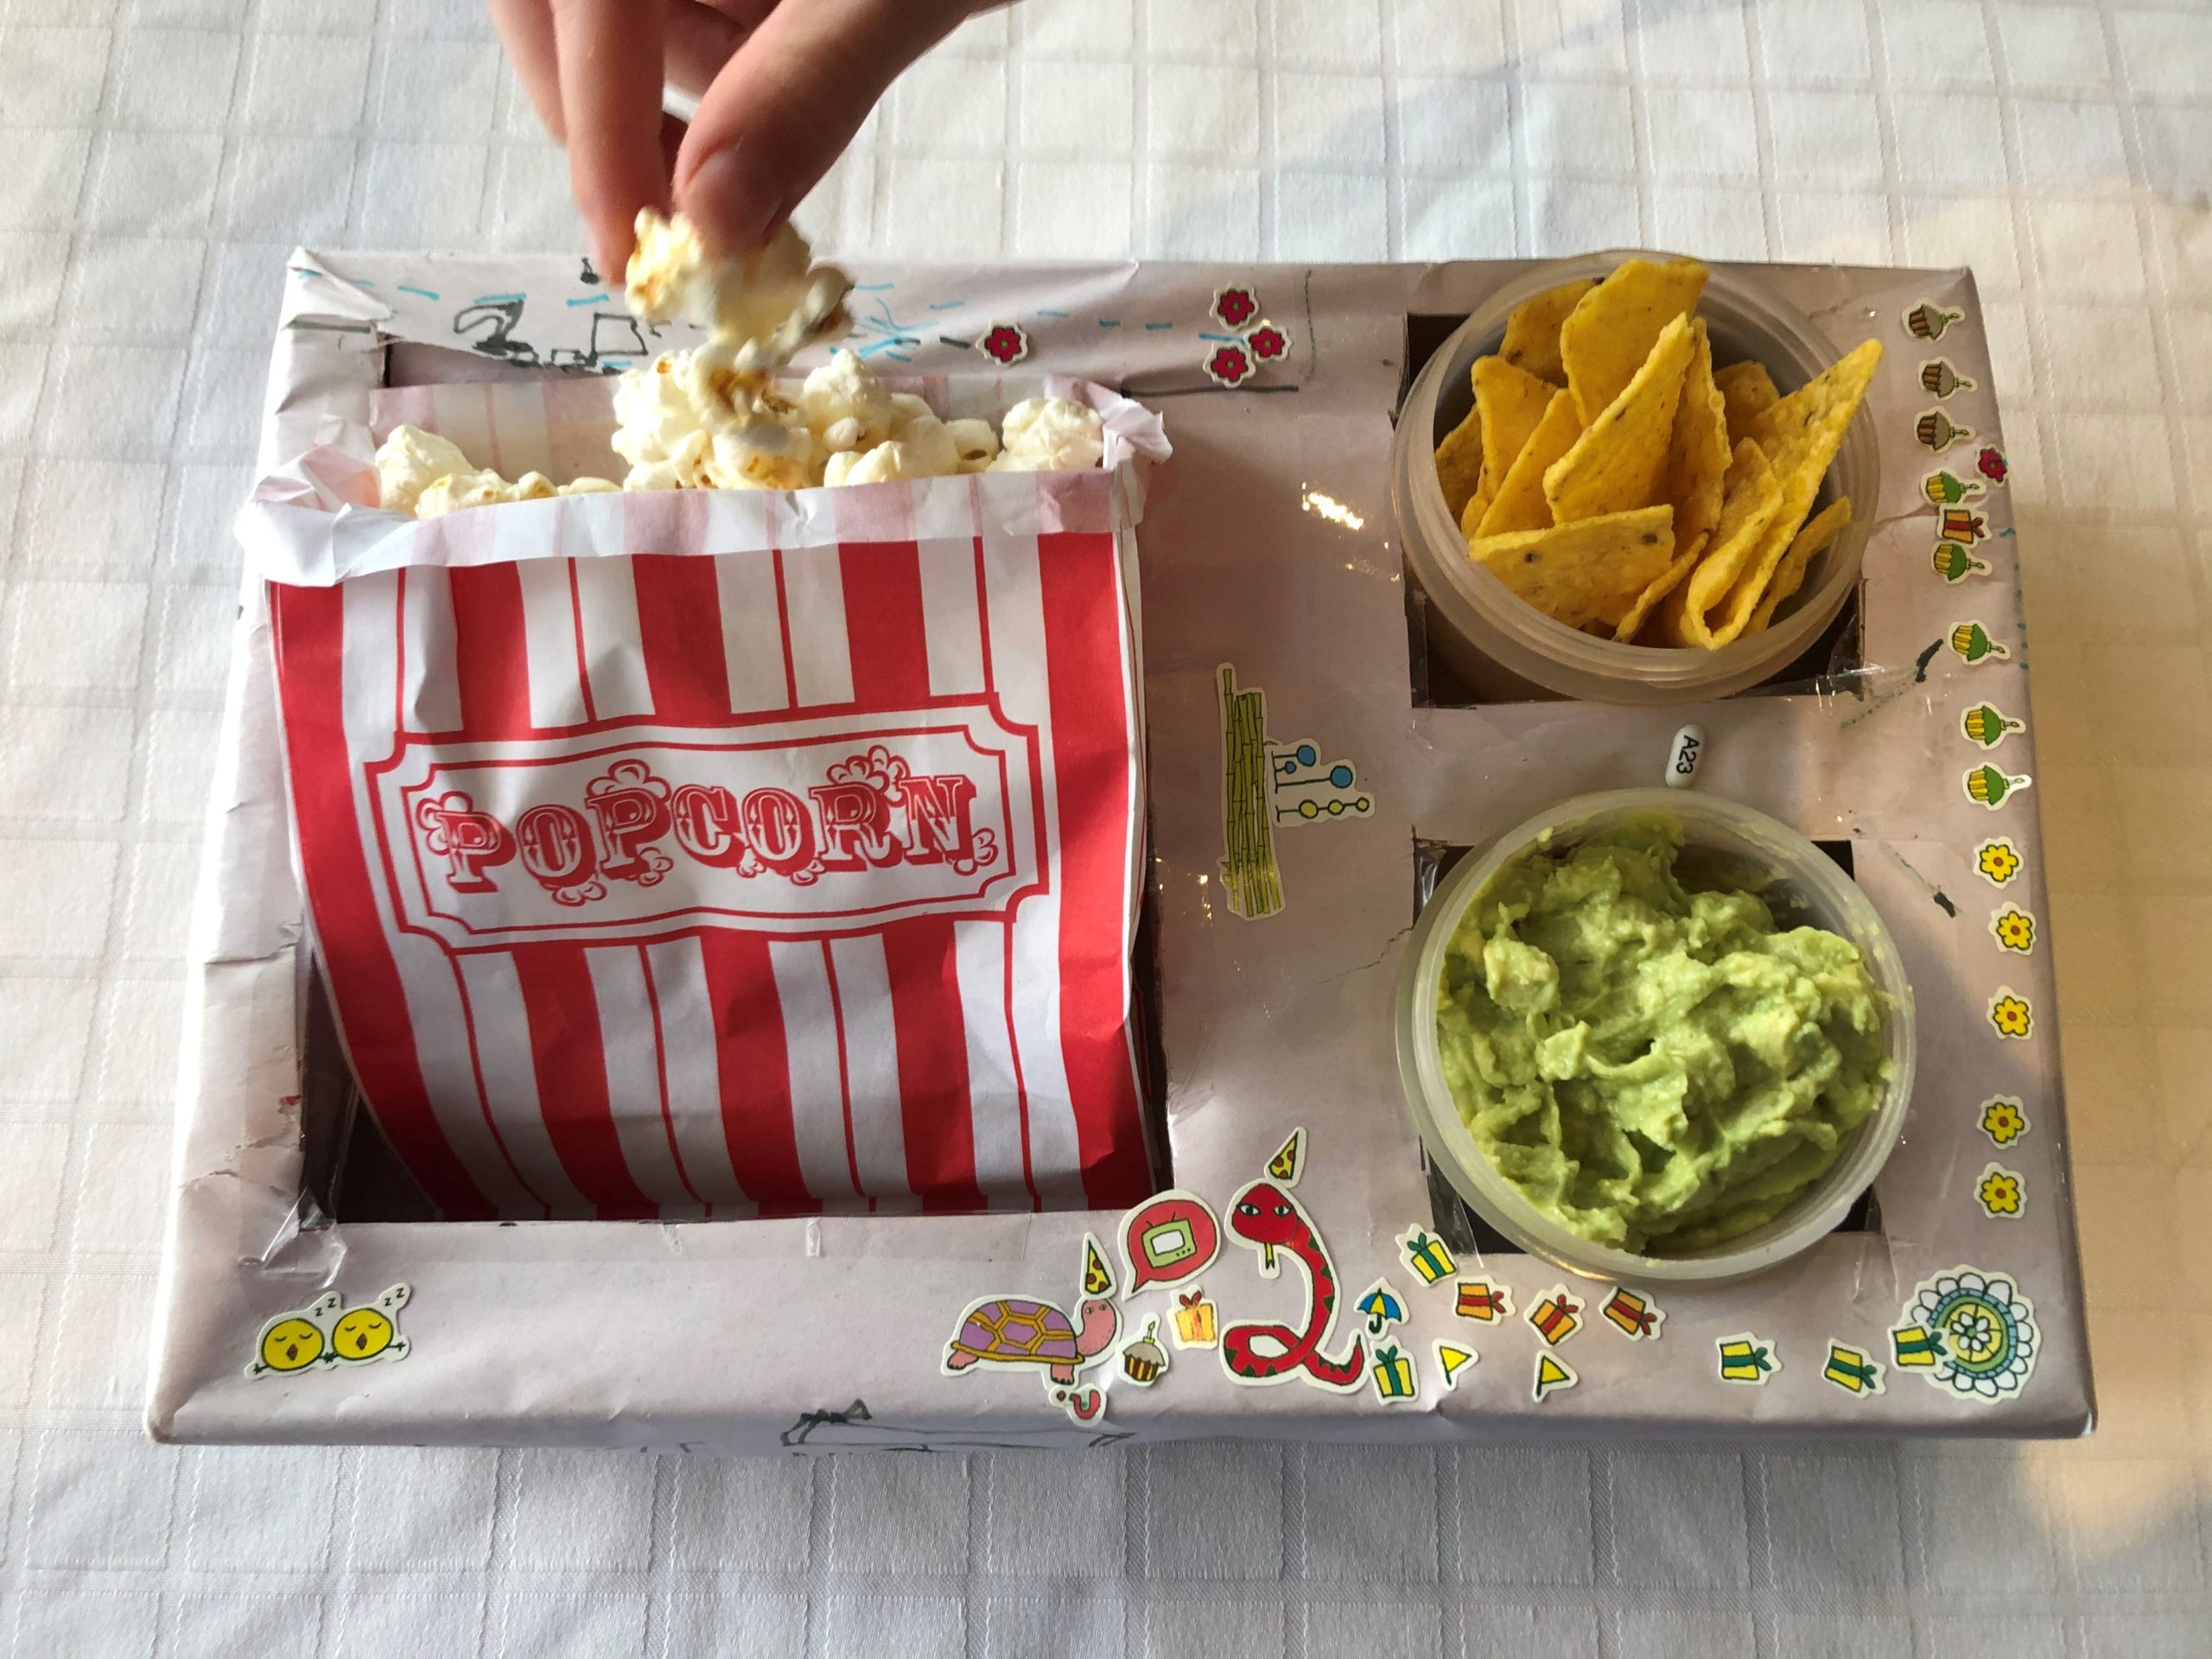 A cardboard box with cut outs for a bag of popcorn,guacamole and corn chips